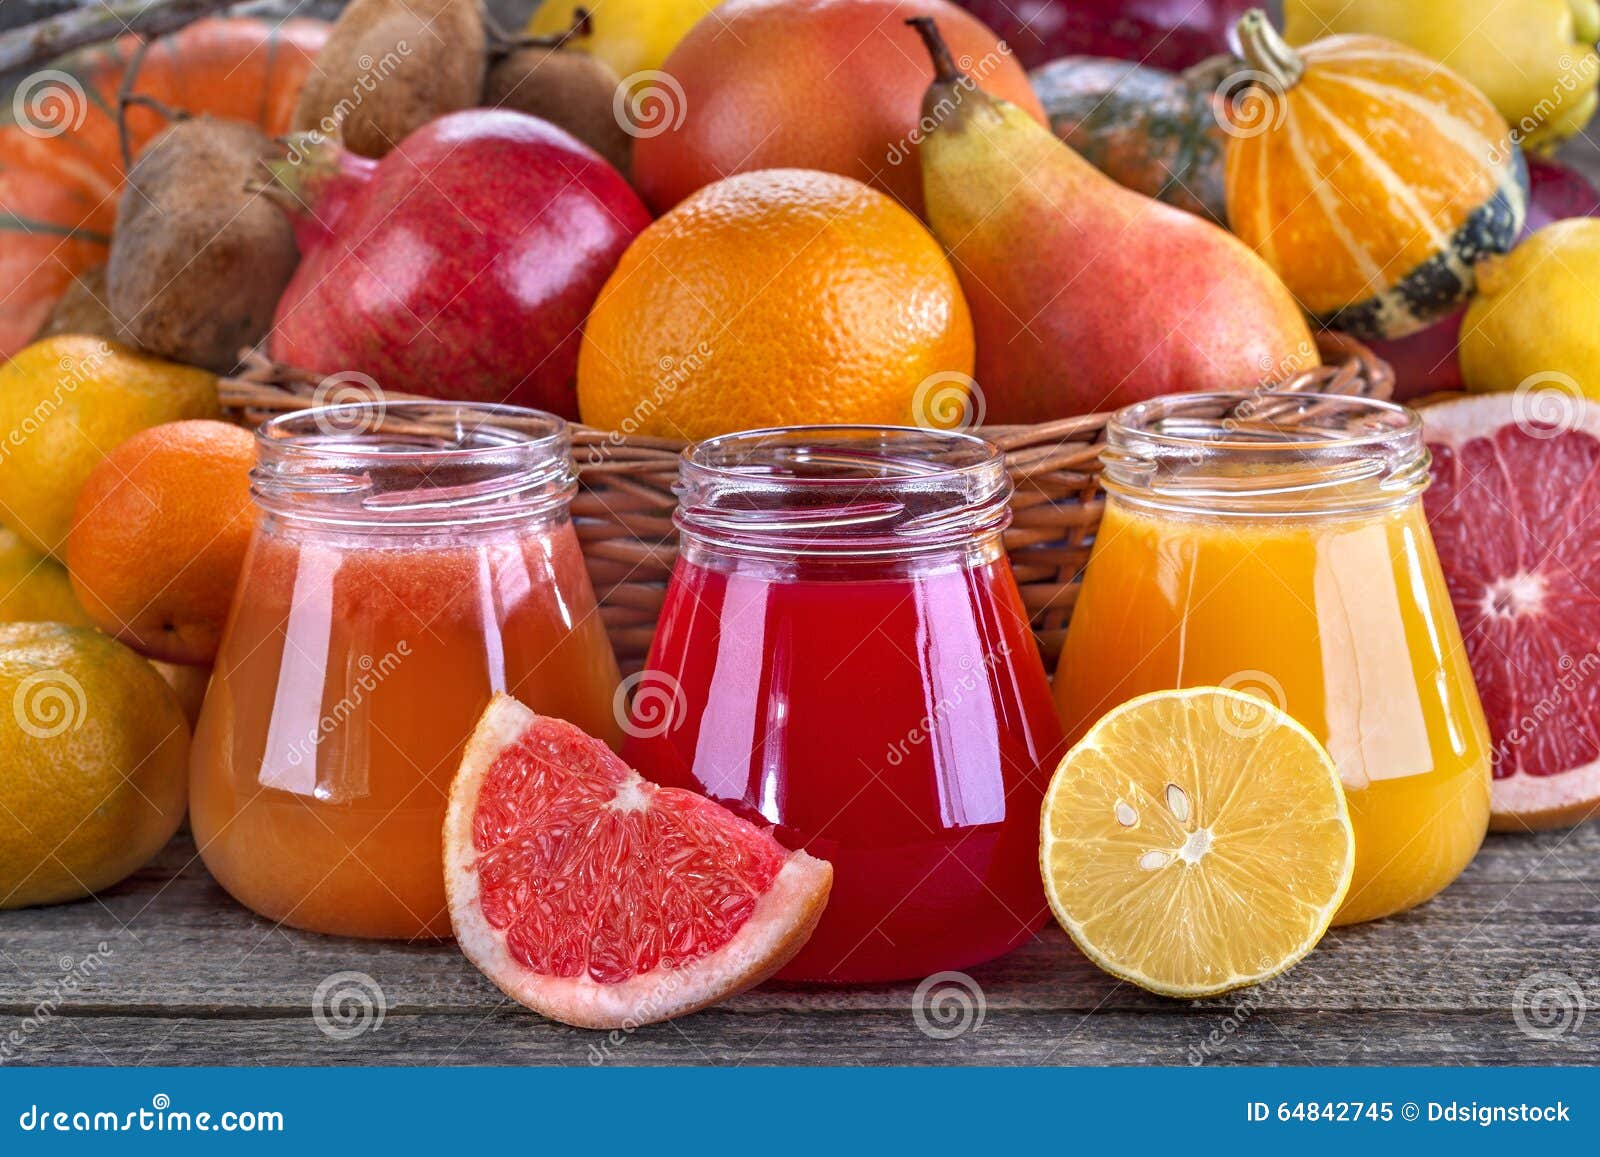 https://thumbs.dreamstime.com/z/smoothies-juices-fresh-healthy-smoothie-juice-mix-fruits-vegetables-64842745.jpg